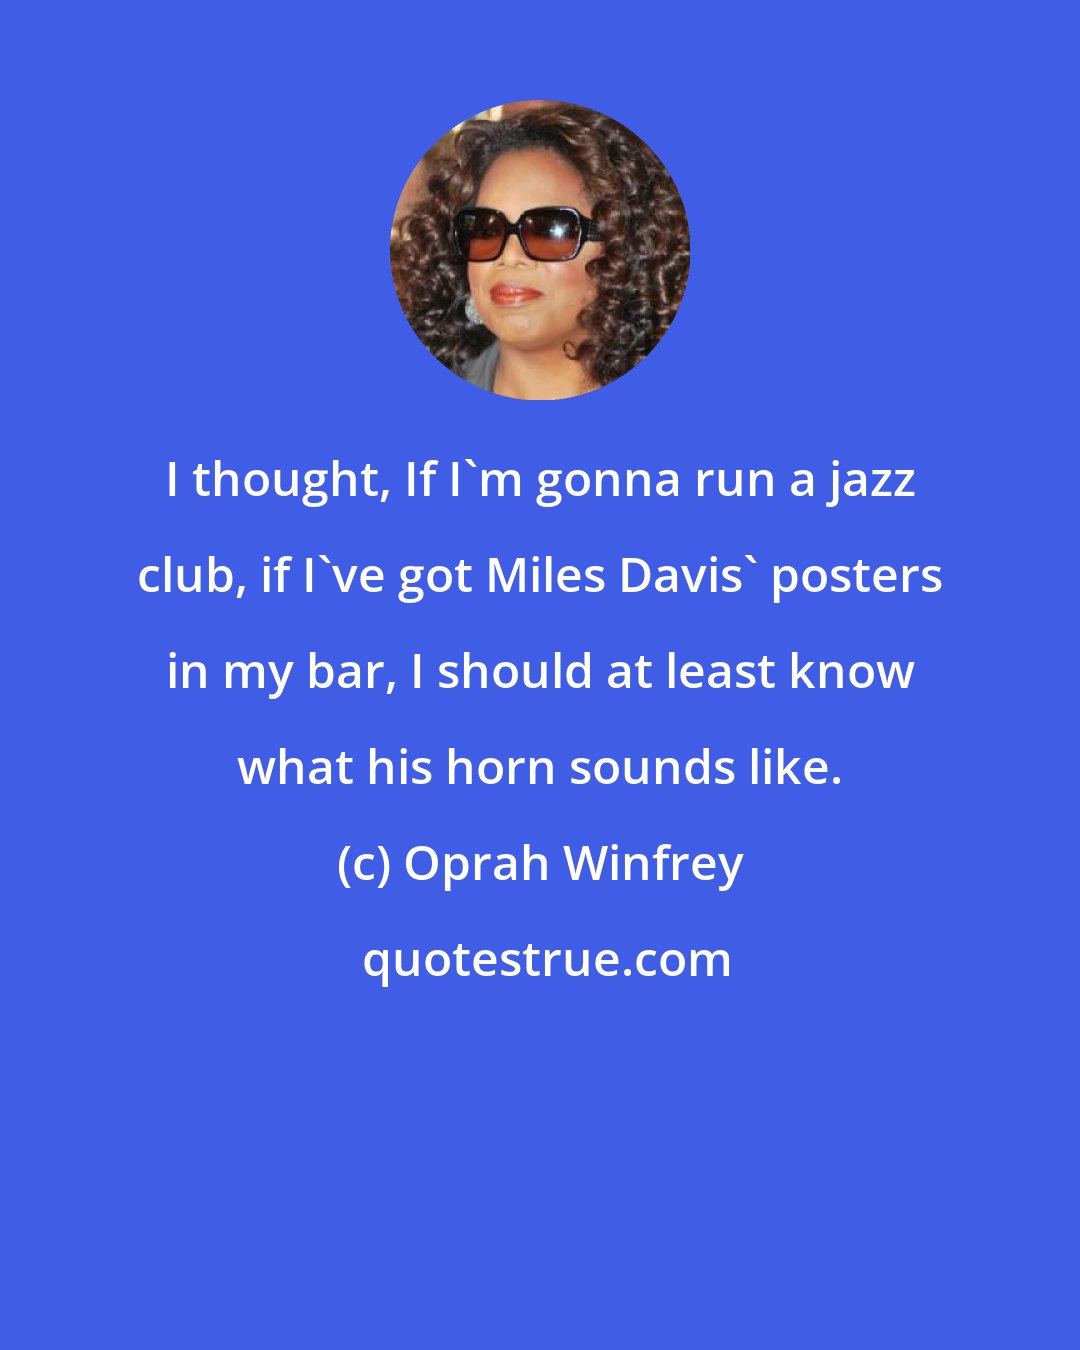 Oprah Winfrey: I thought, If I'm gonna run a jazz club, if I've got Miles Davis' posters in my bar, I should at least know what his horn sounds like.